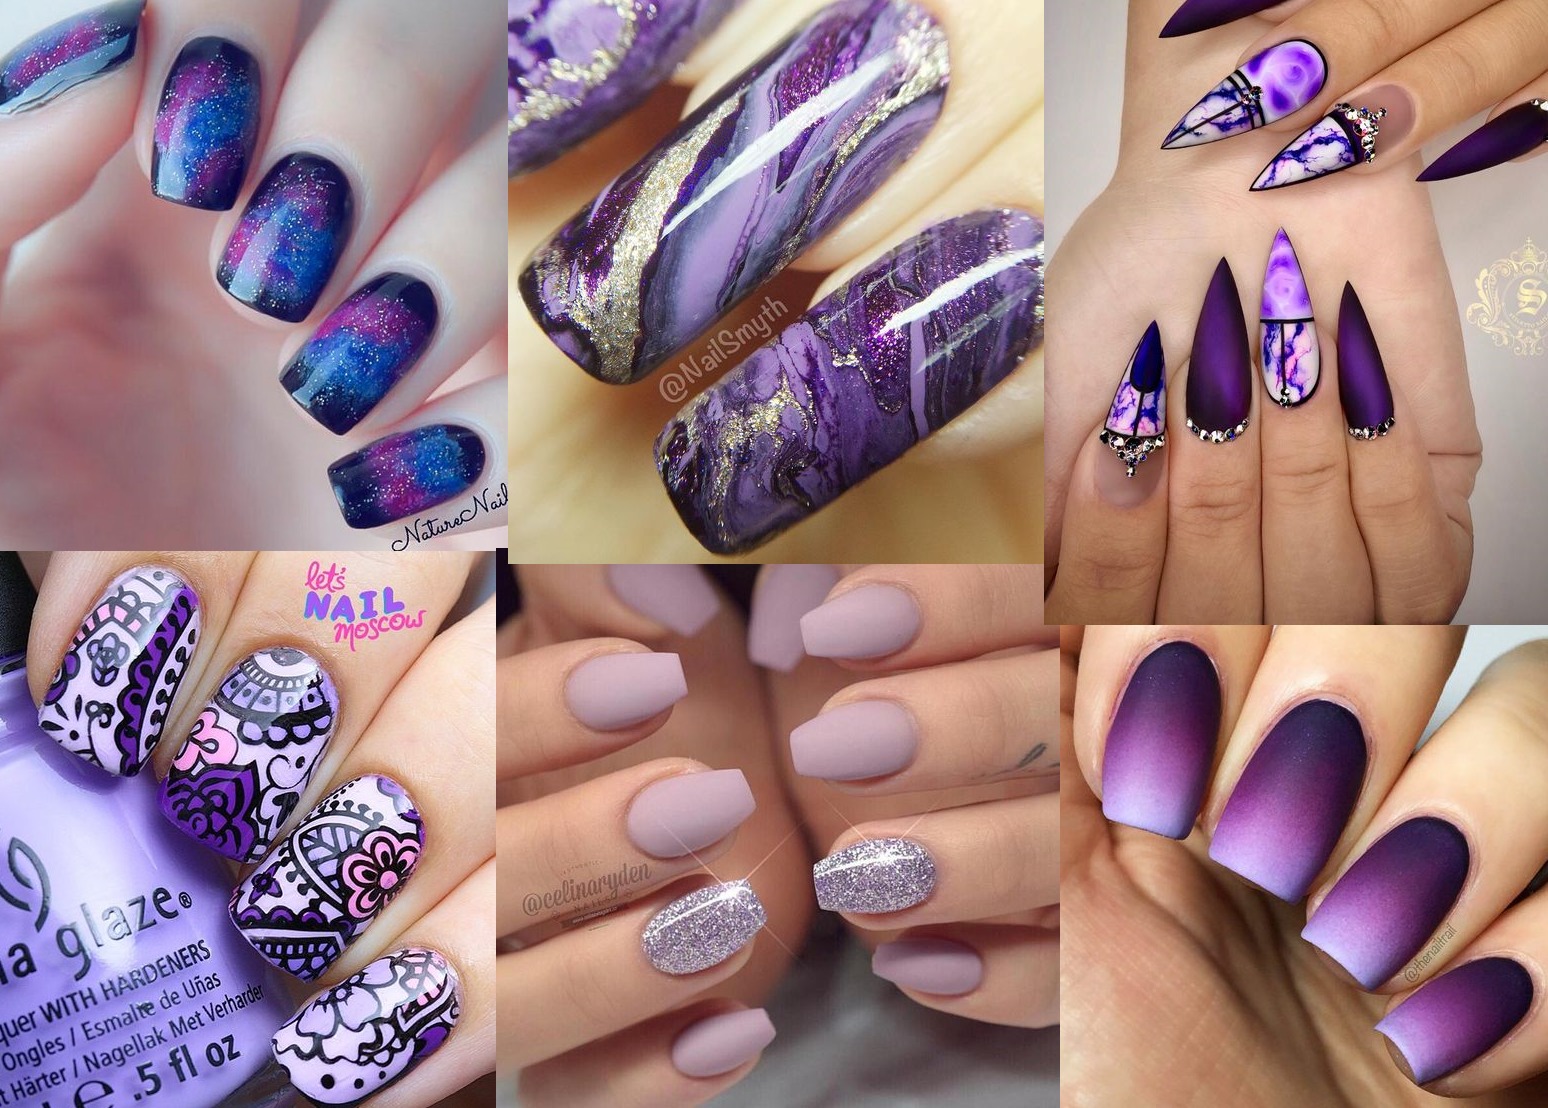 7. Elegant and Simple Nail Designs for Special Events - wide 2